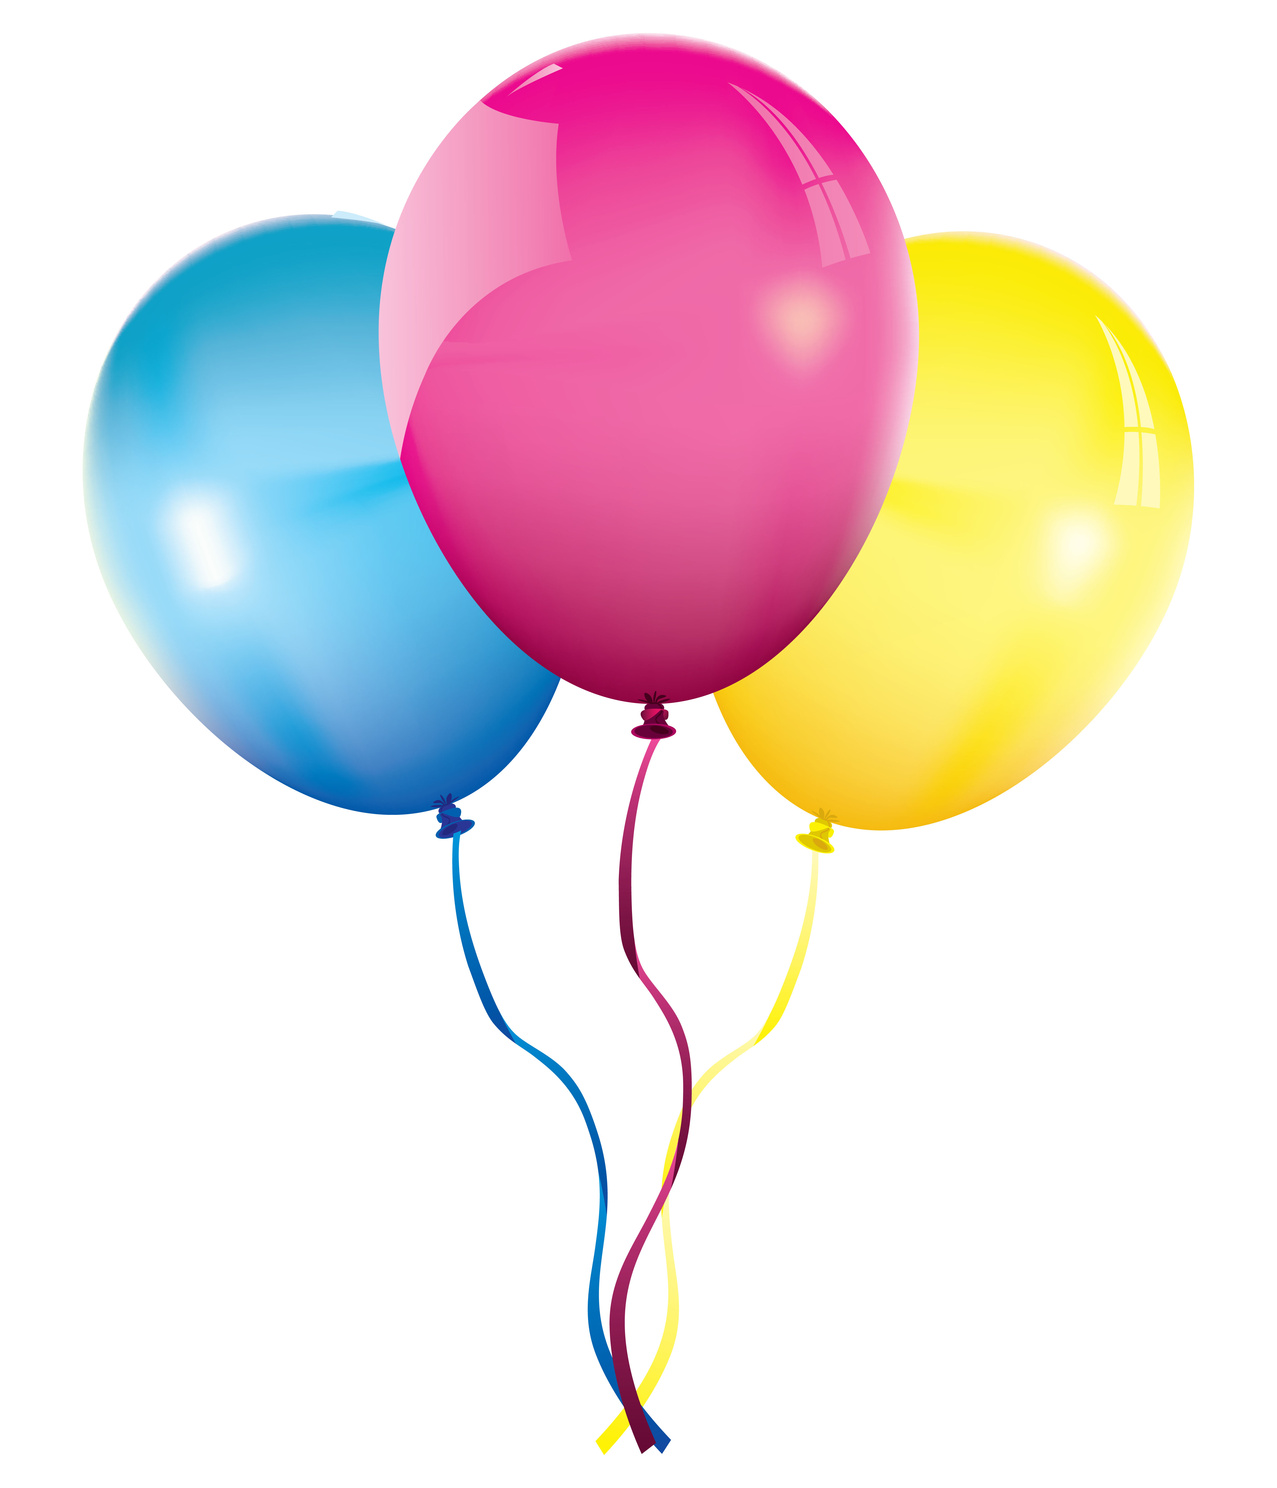 balloon clipart free download - photo #24